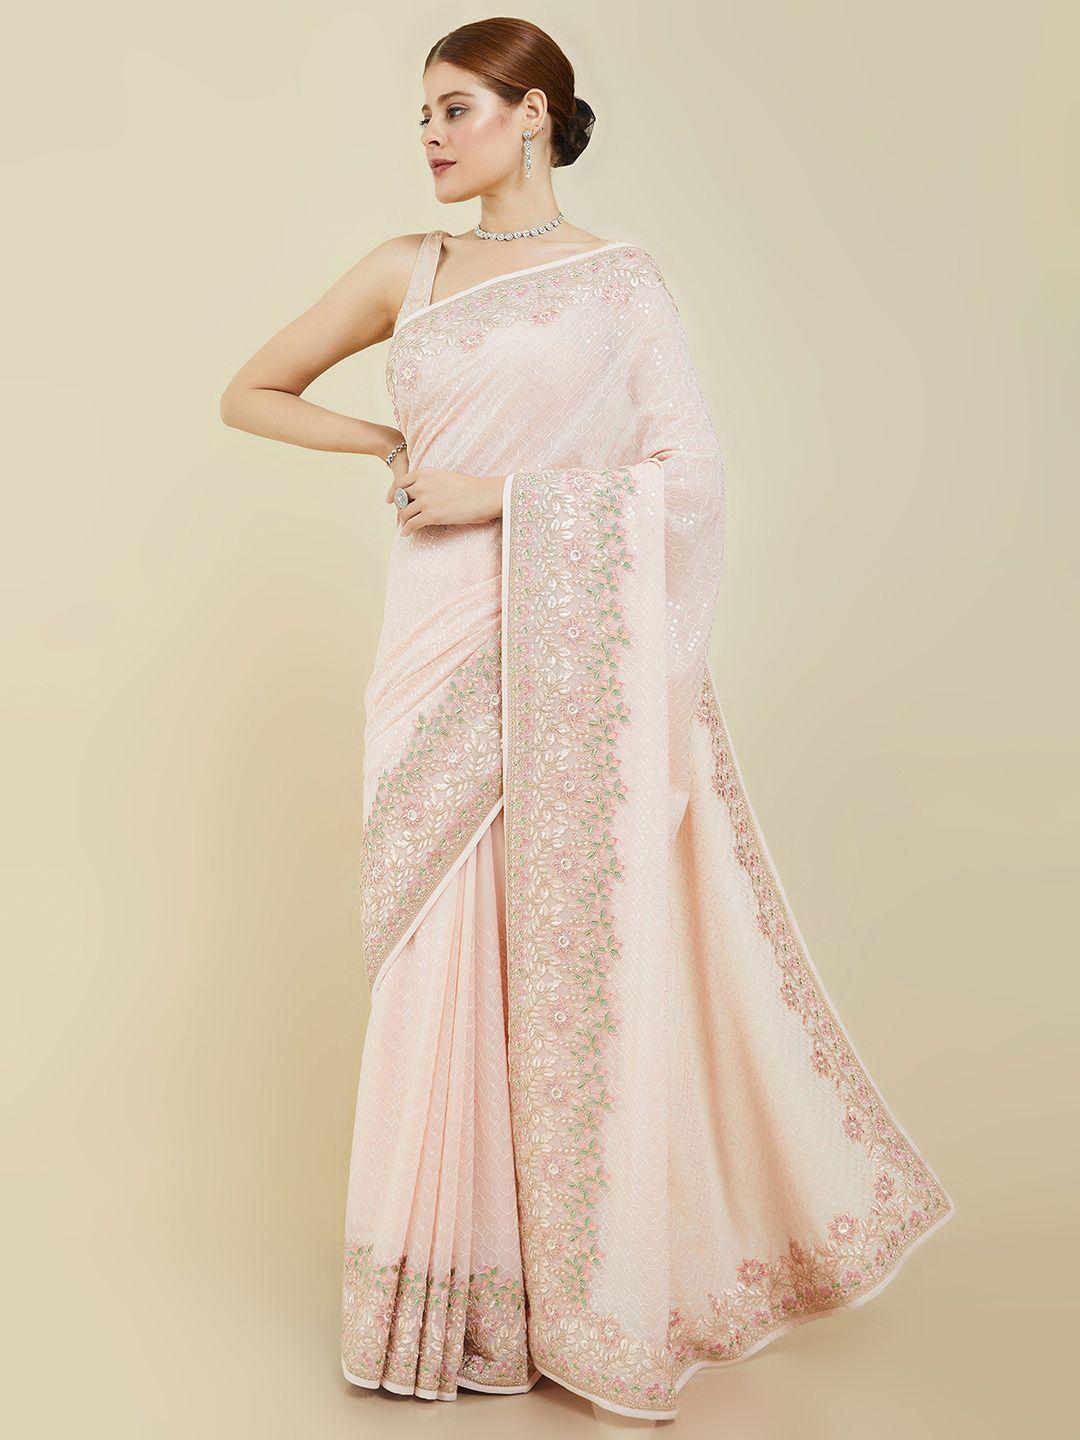 soch peach-coloured & green floral sequinned pure georgette saree